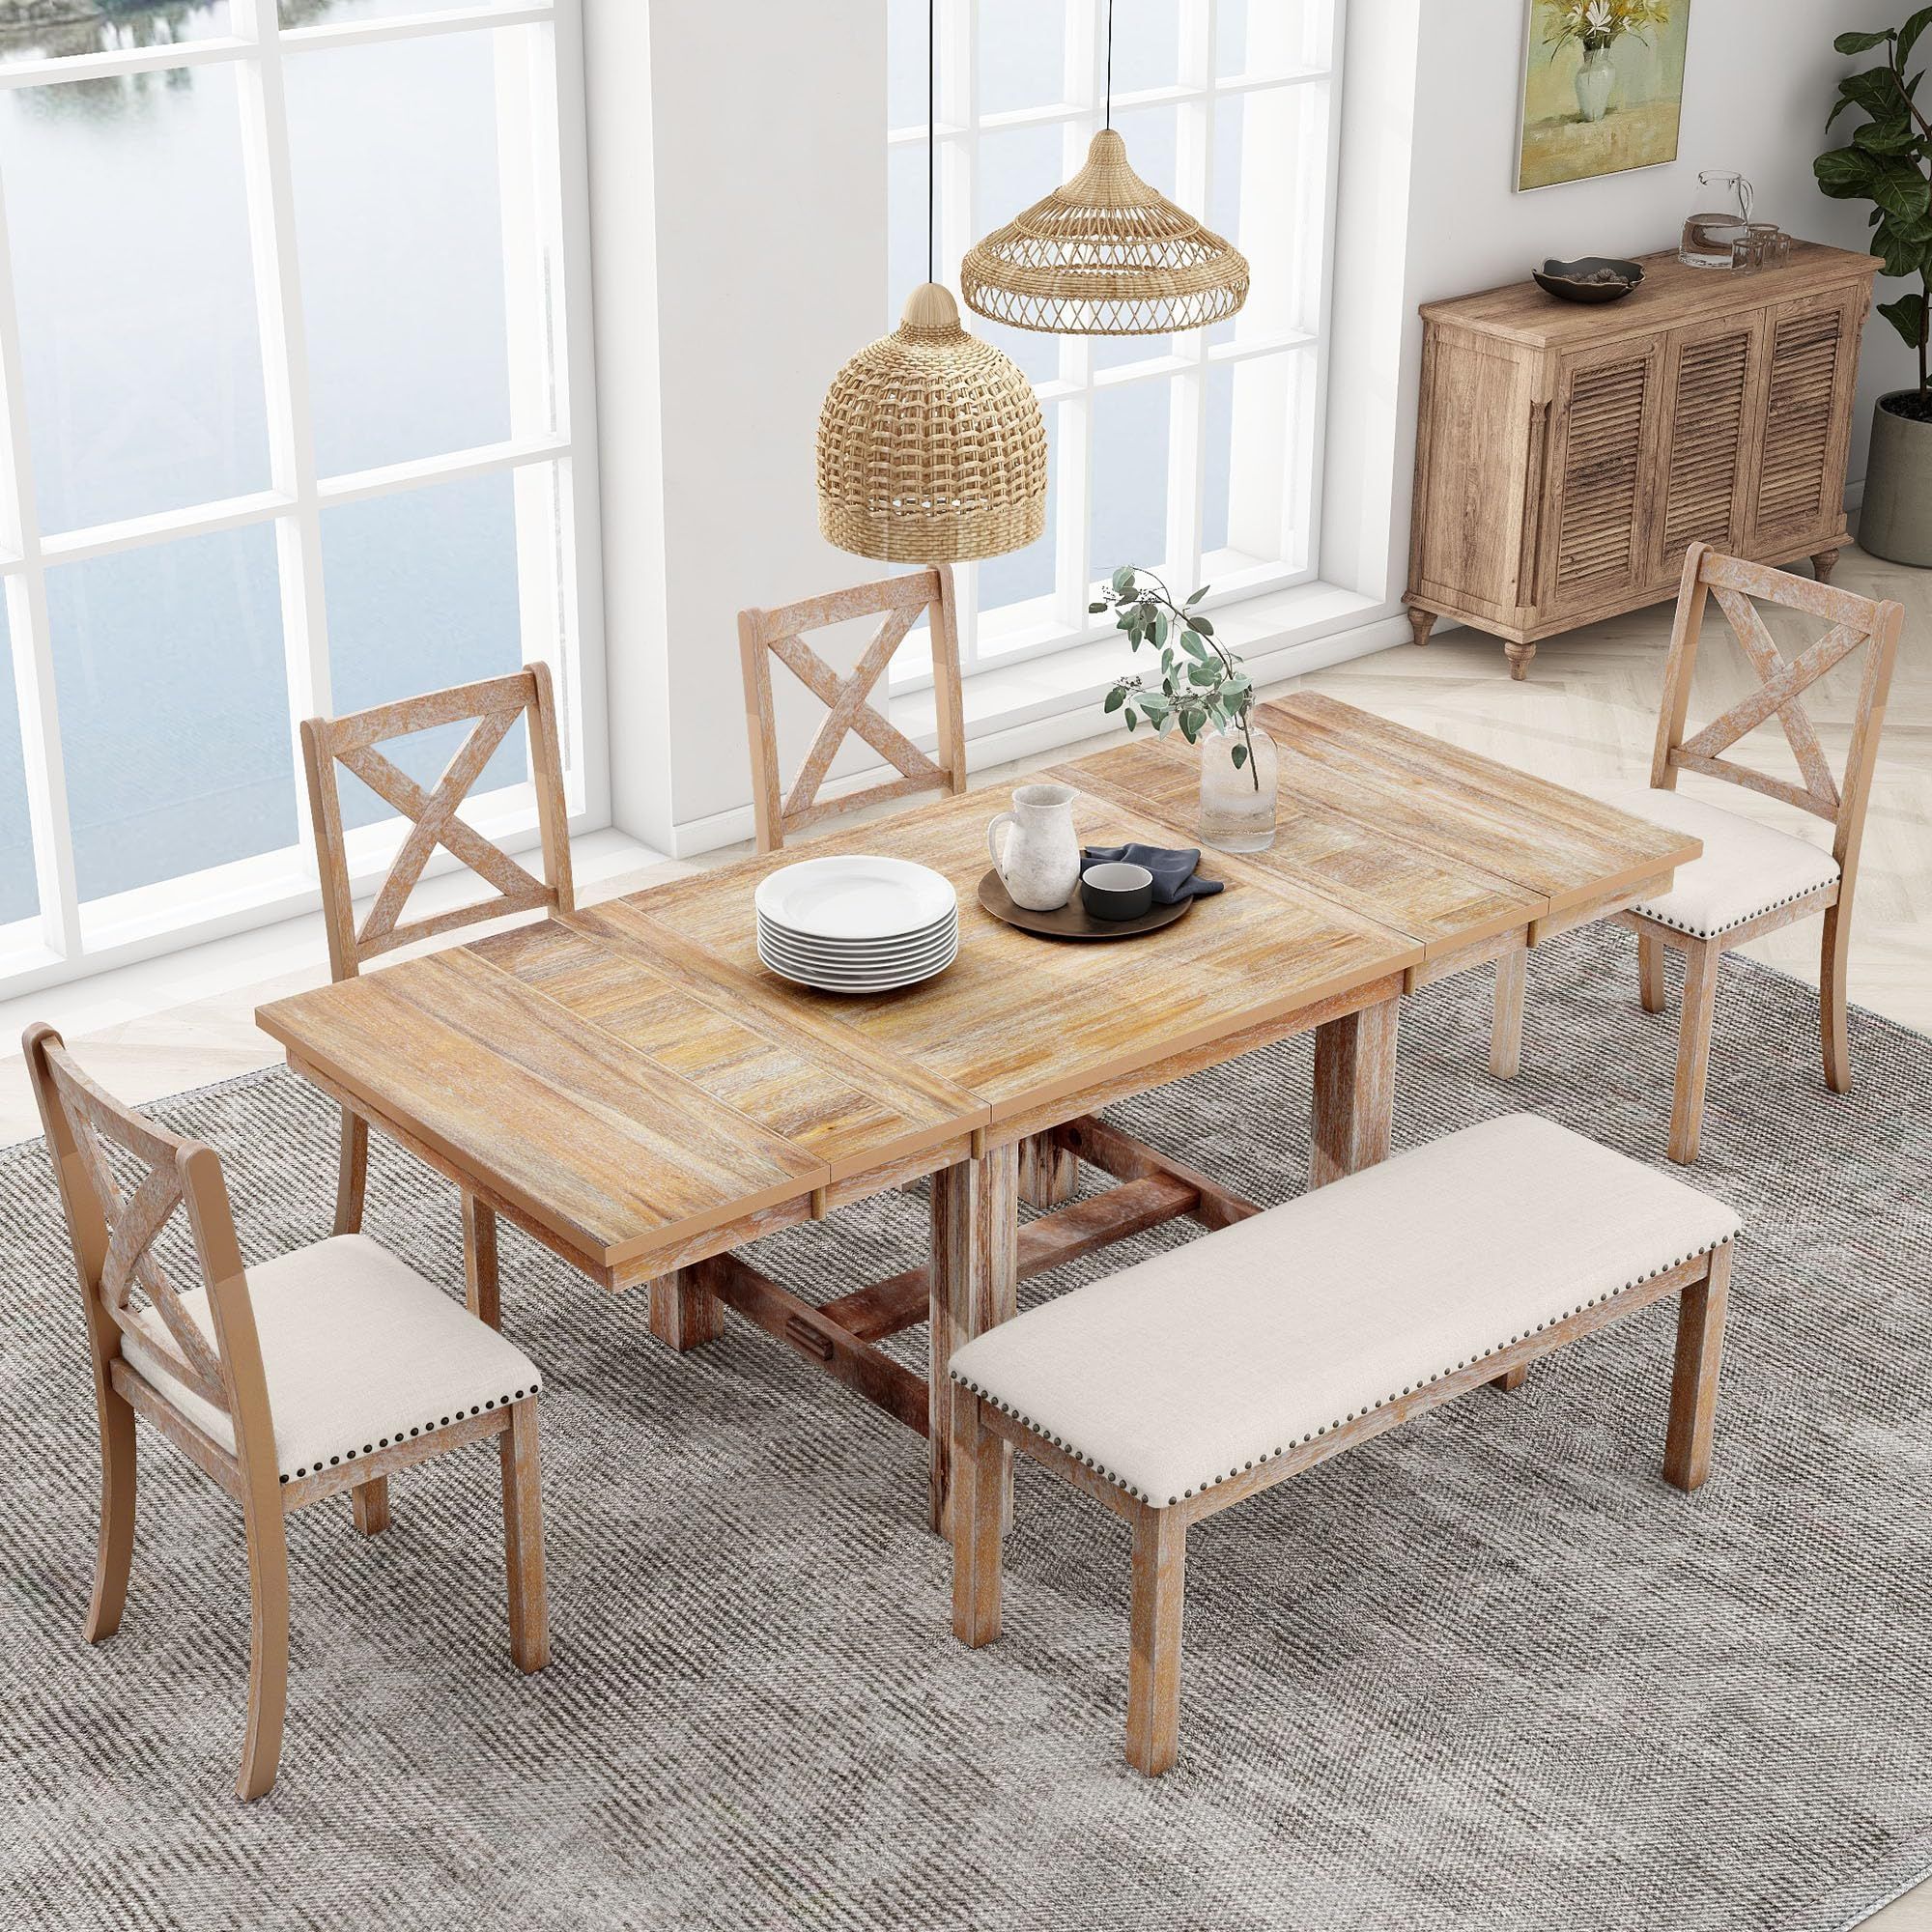 Complete Your Dining Experience with a Kitchen Table Set Featuring a Bench and Chairs